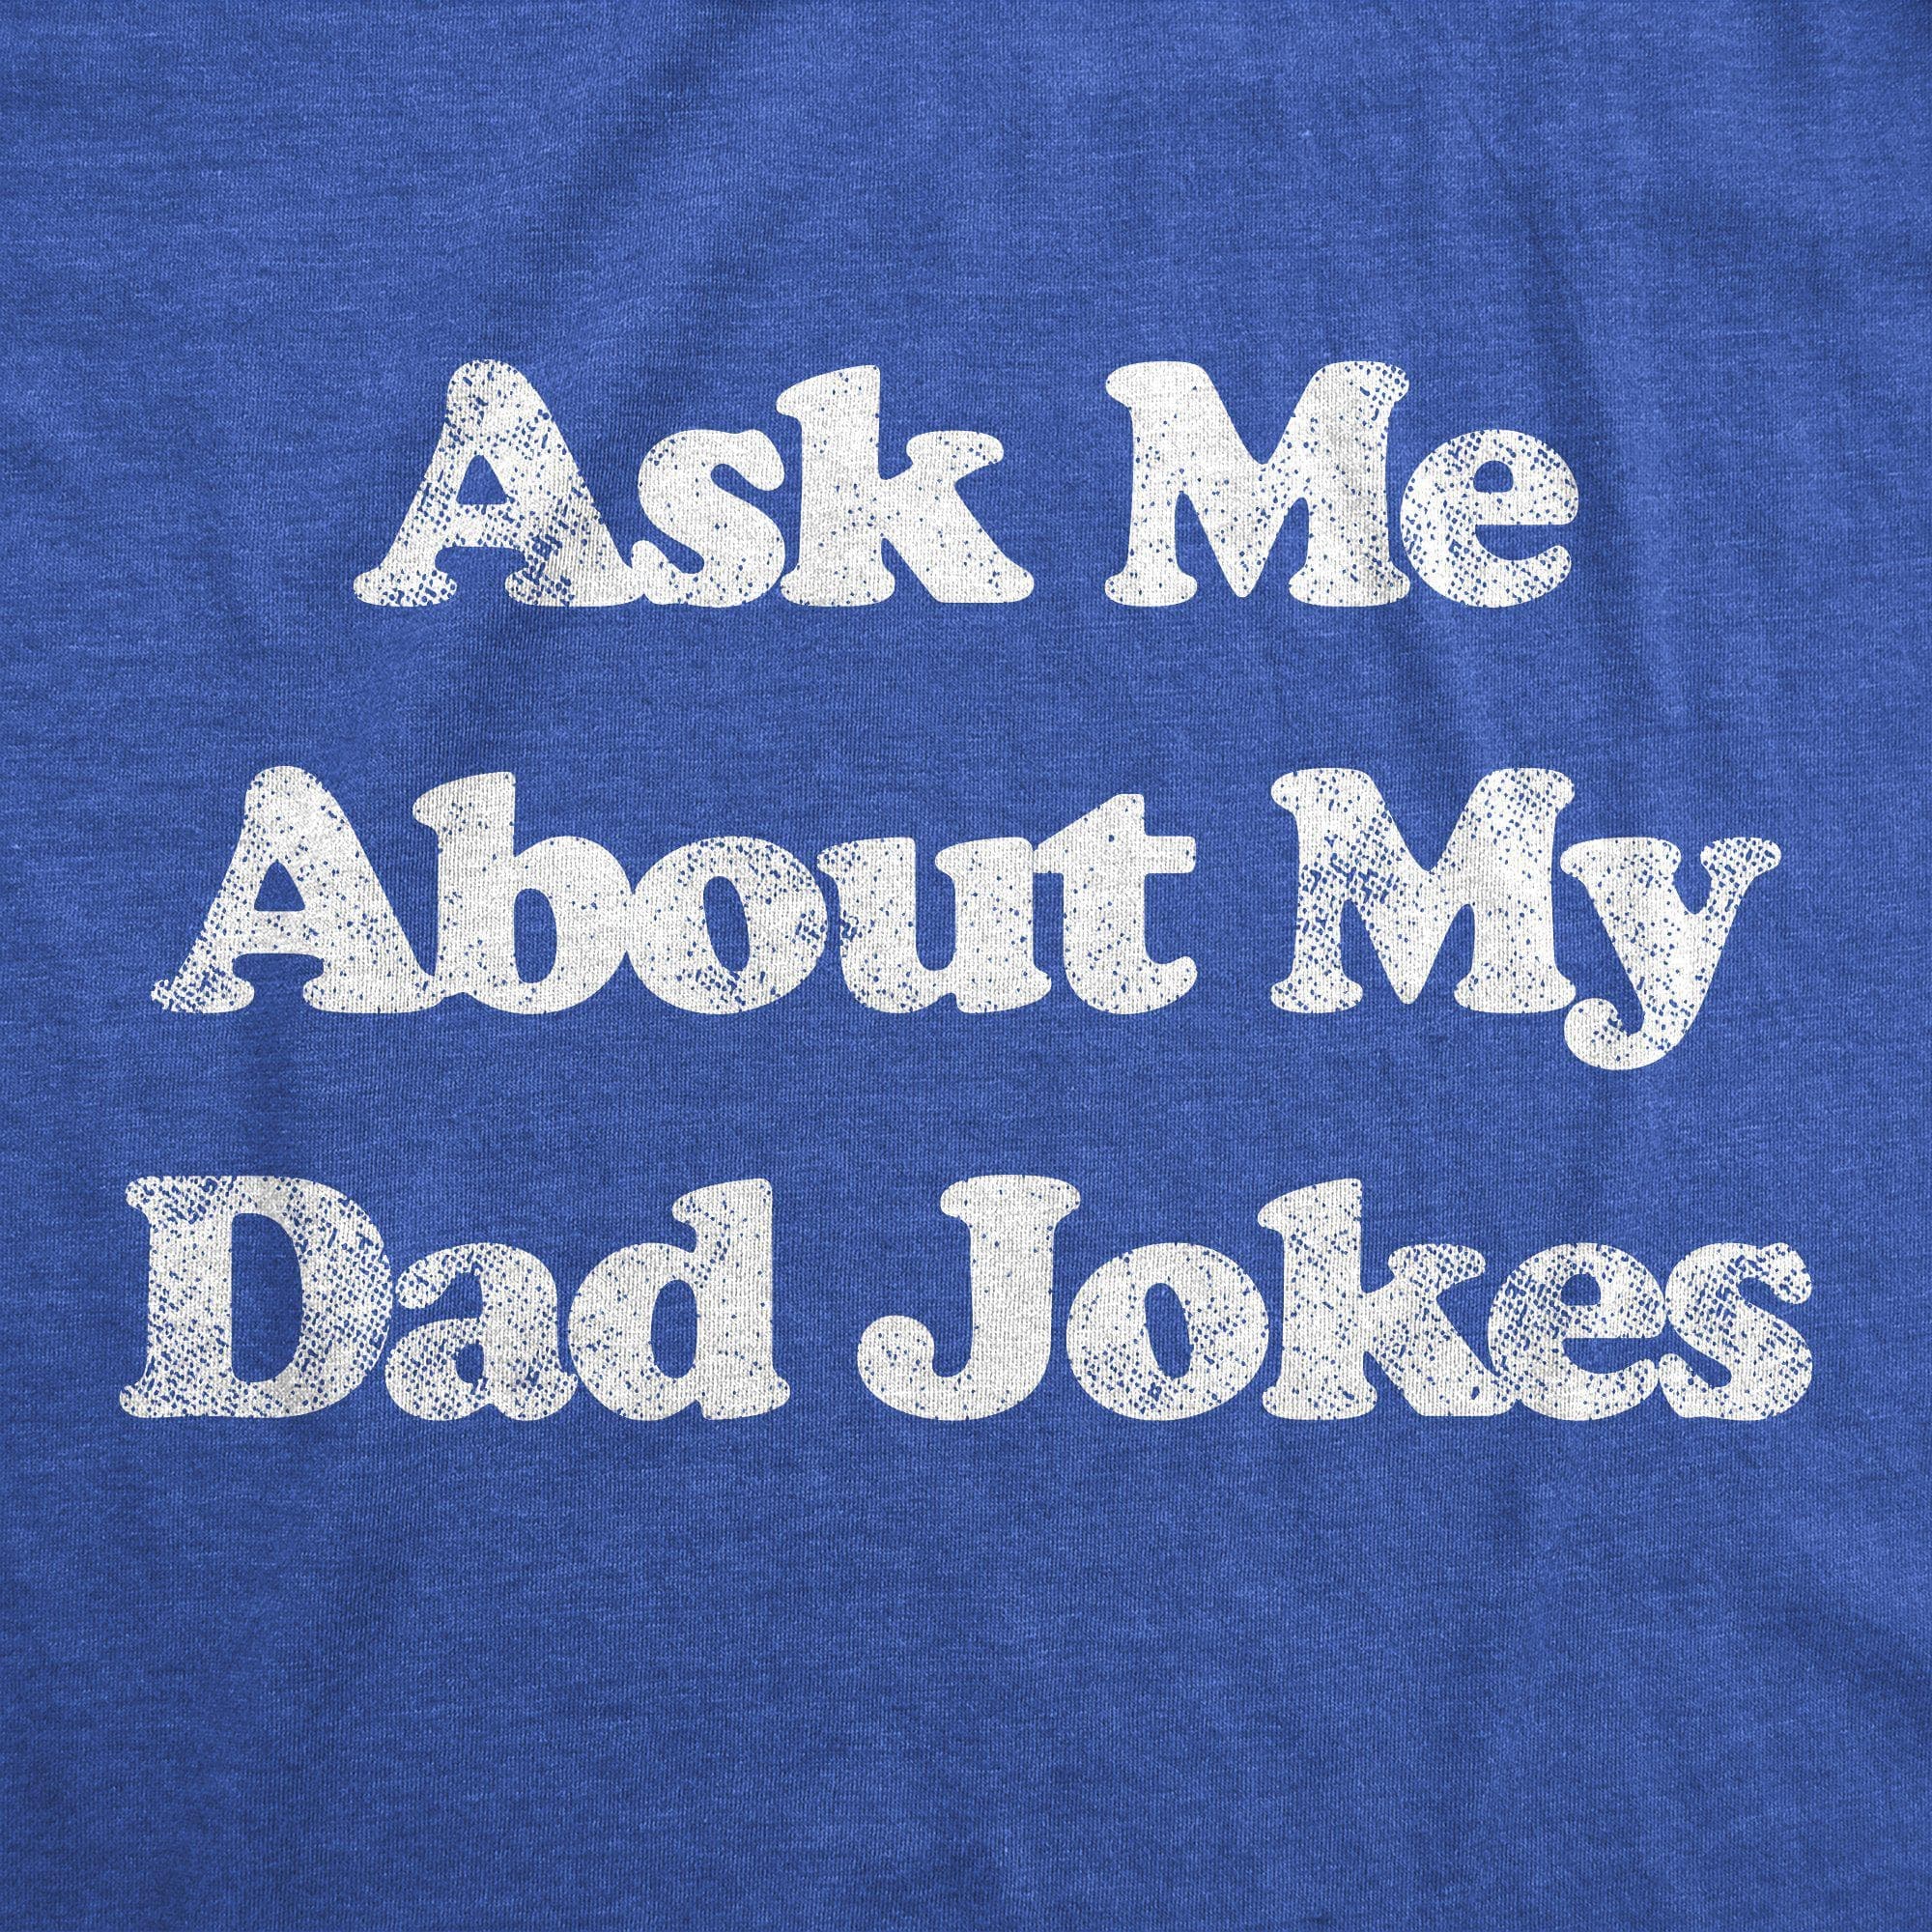 Ask Me About My Dad Jokes Men's Tshirt - Crazy Dog T-Shirts